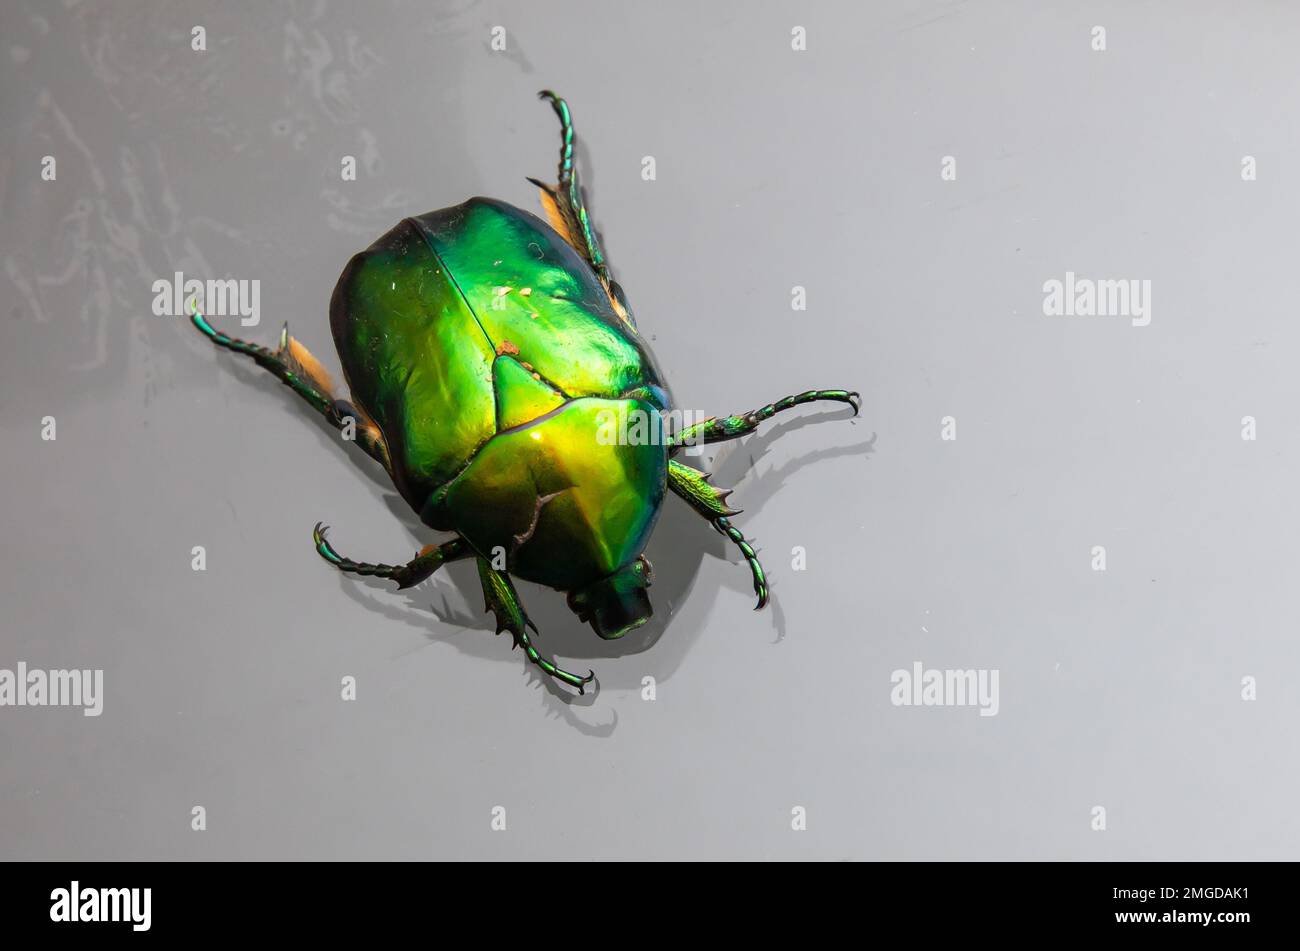 Cetonia aurata called the green rose chafer is a beetle that has a metallic structurally coloured green and a distinct V-shaped scutellum. Underside o Stock Photo